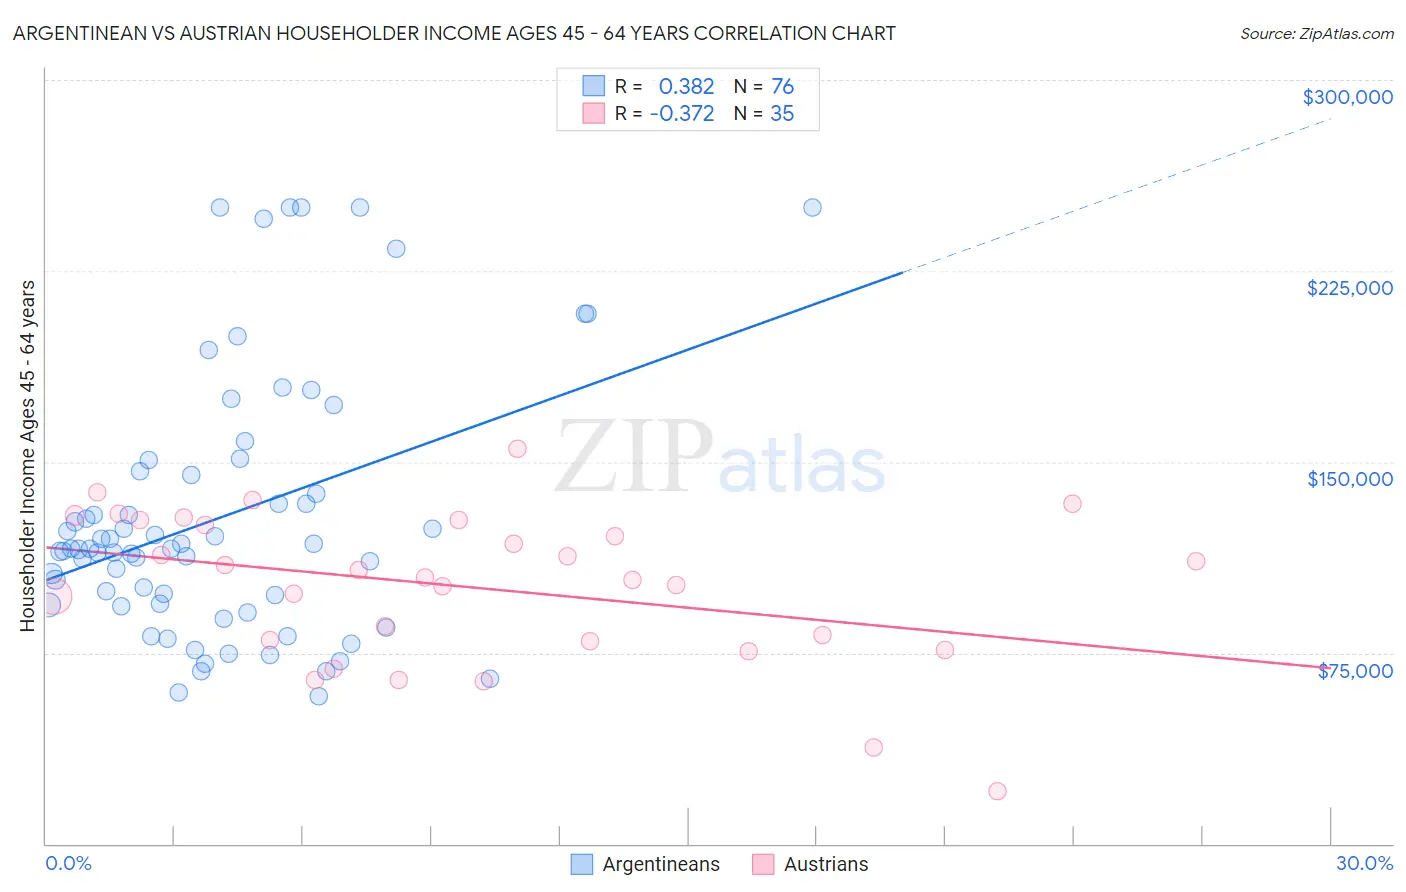 Argentinean vs Austrian Householder Income Ages 45 - 64 years